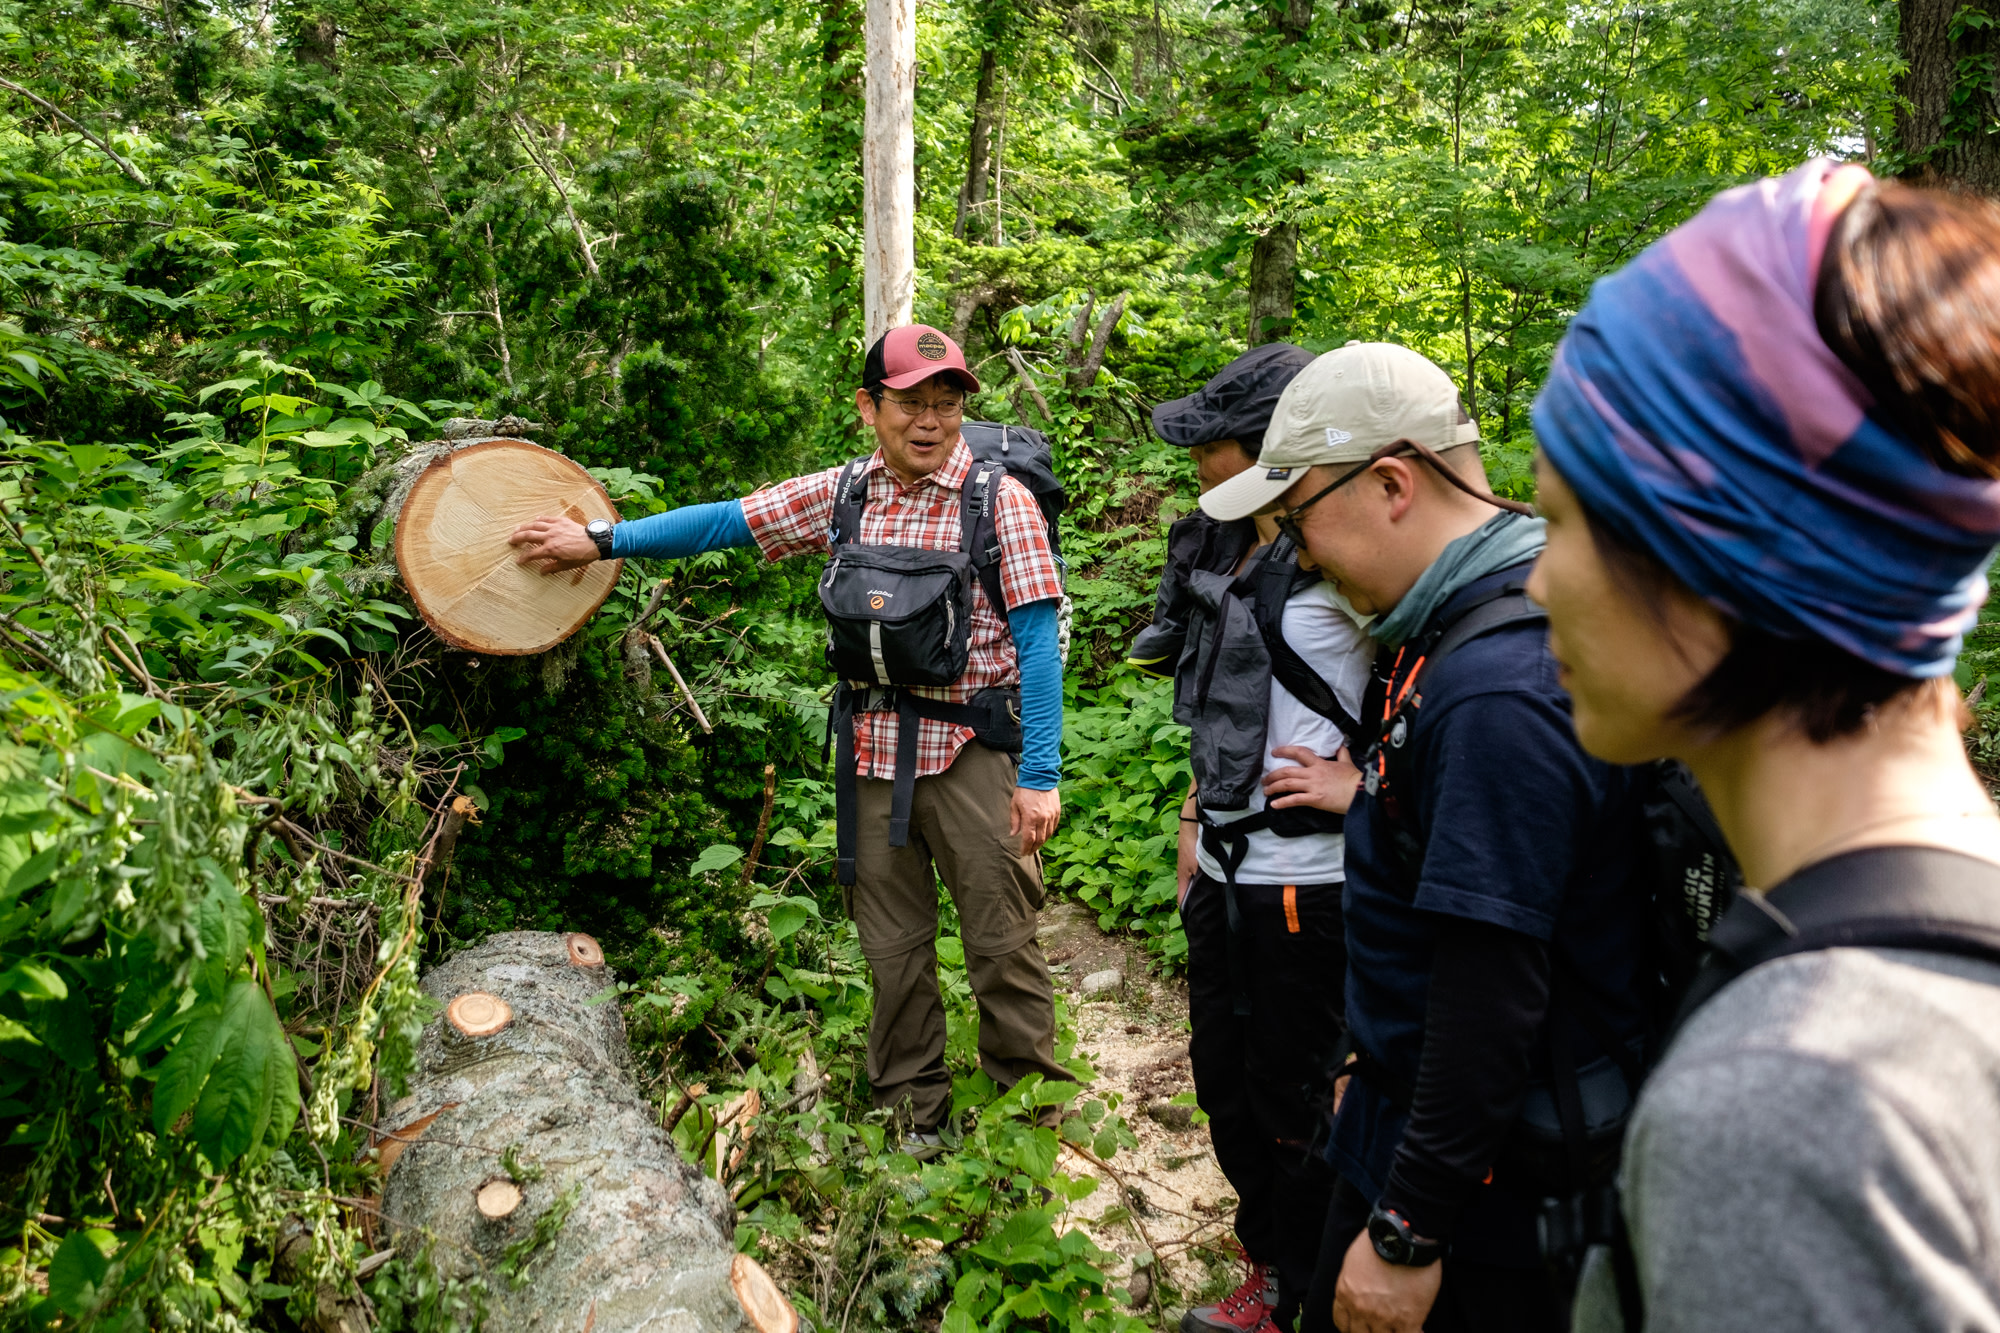 A nature guide explaining a recently cut tree to a group of hikers